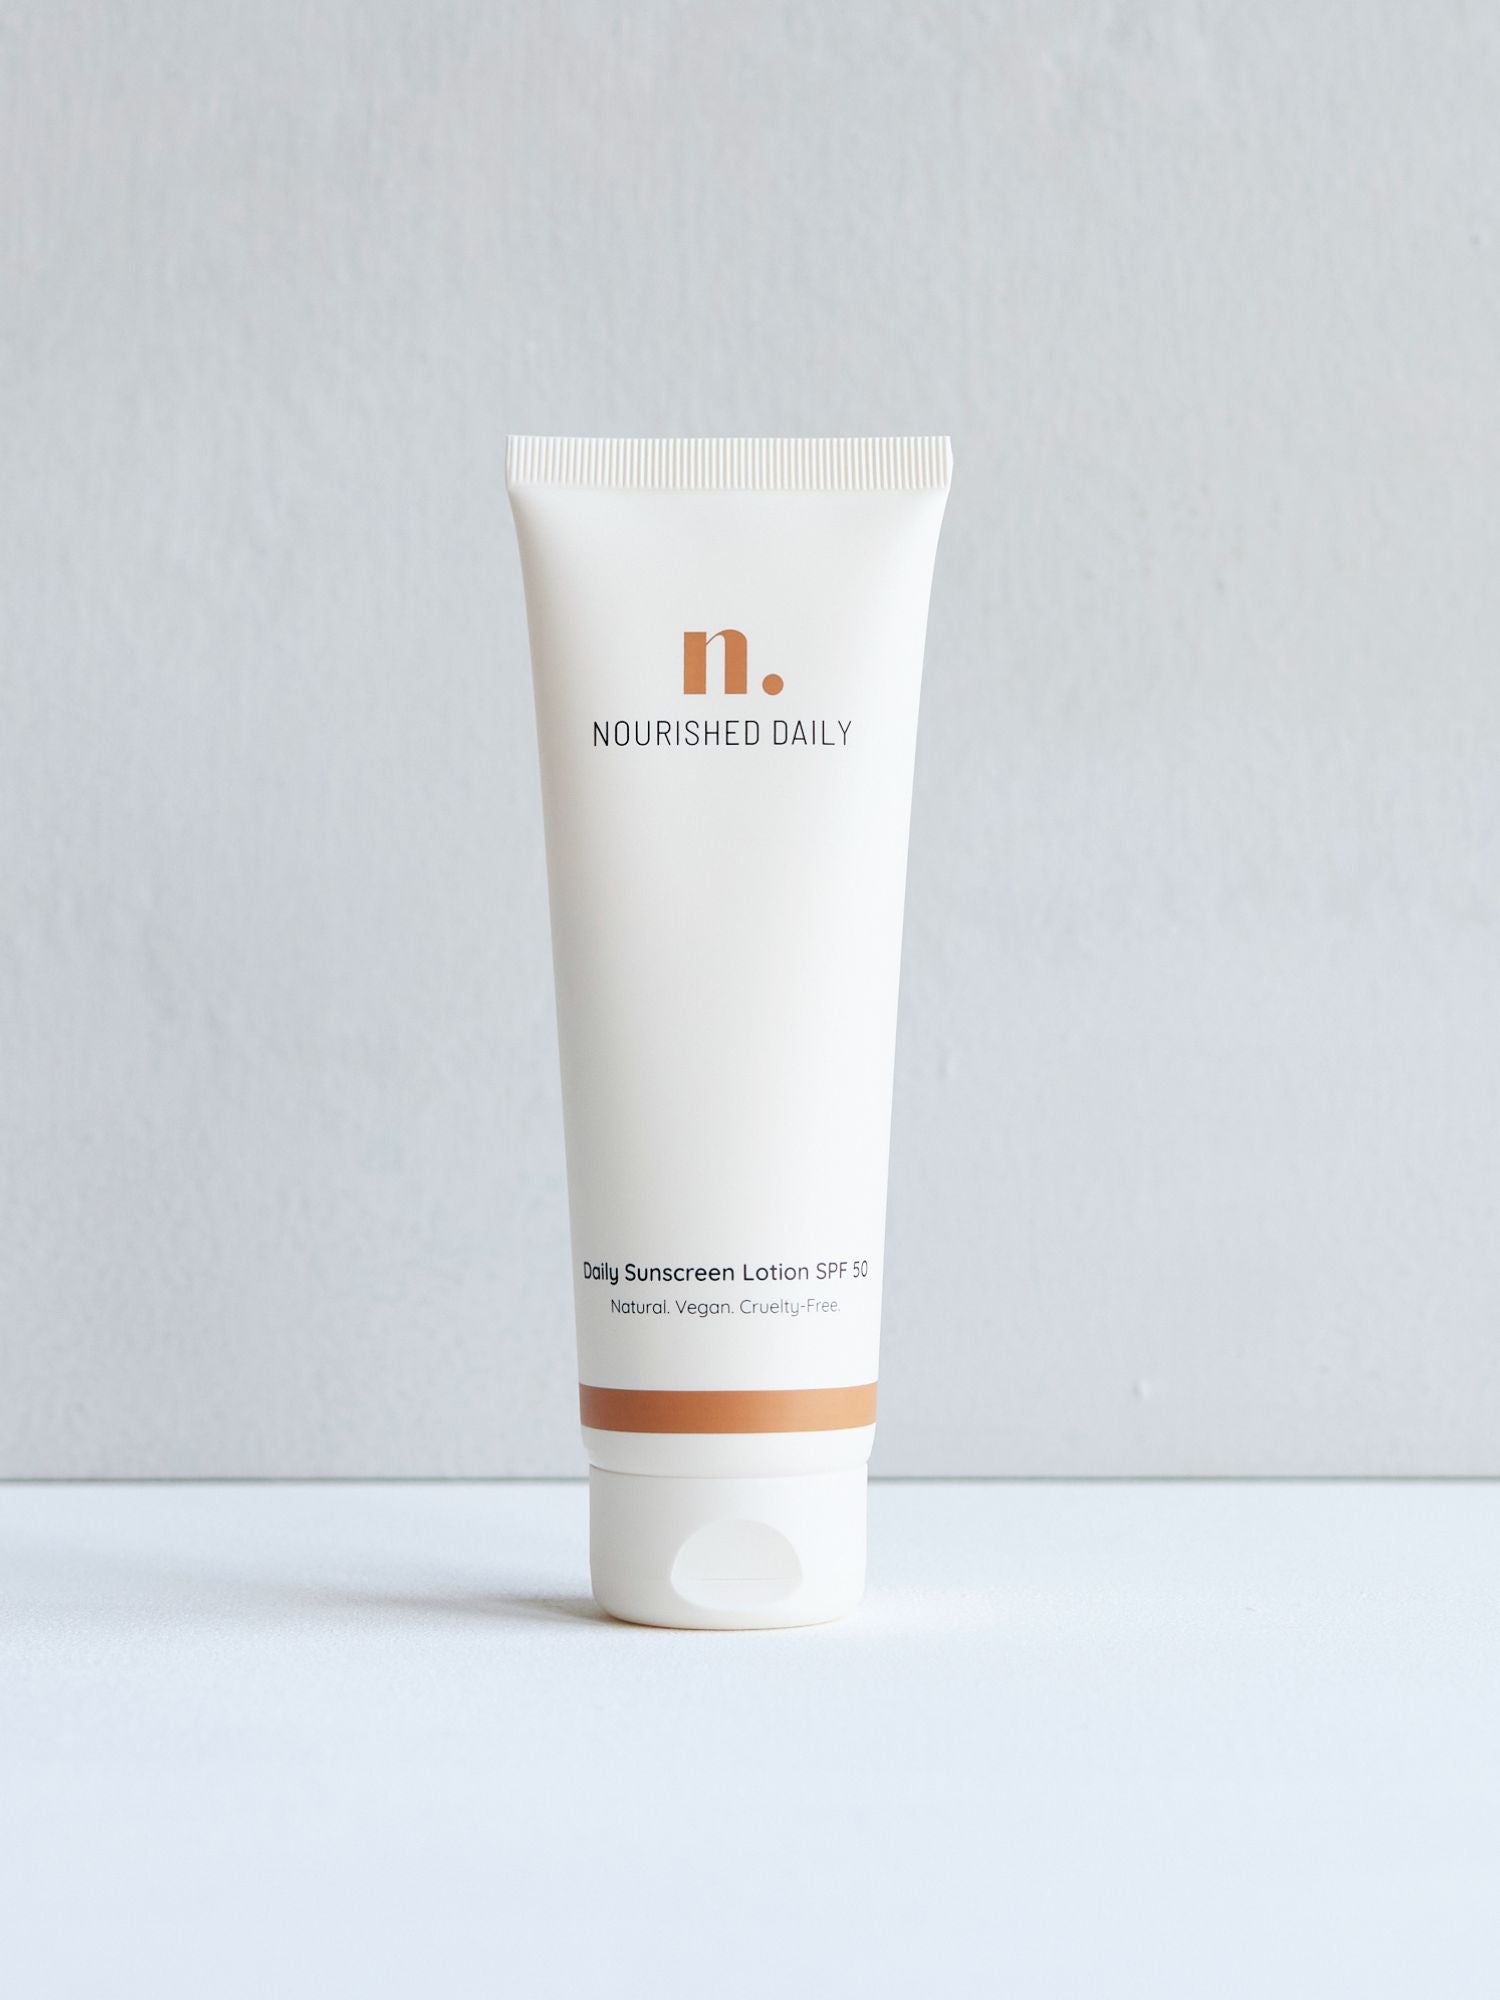 Natural Daily Susncreen Lotion SPF50, Daily Sunscreen, Sunscreen SPF50, Nourished Daily.